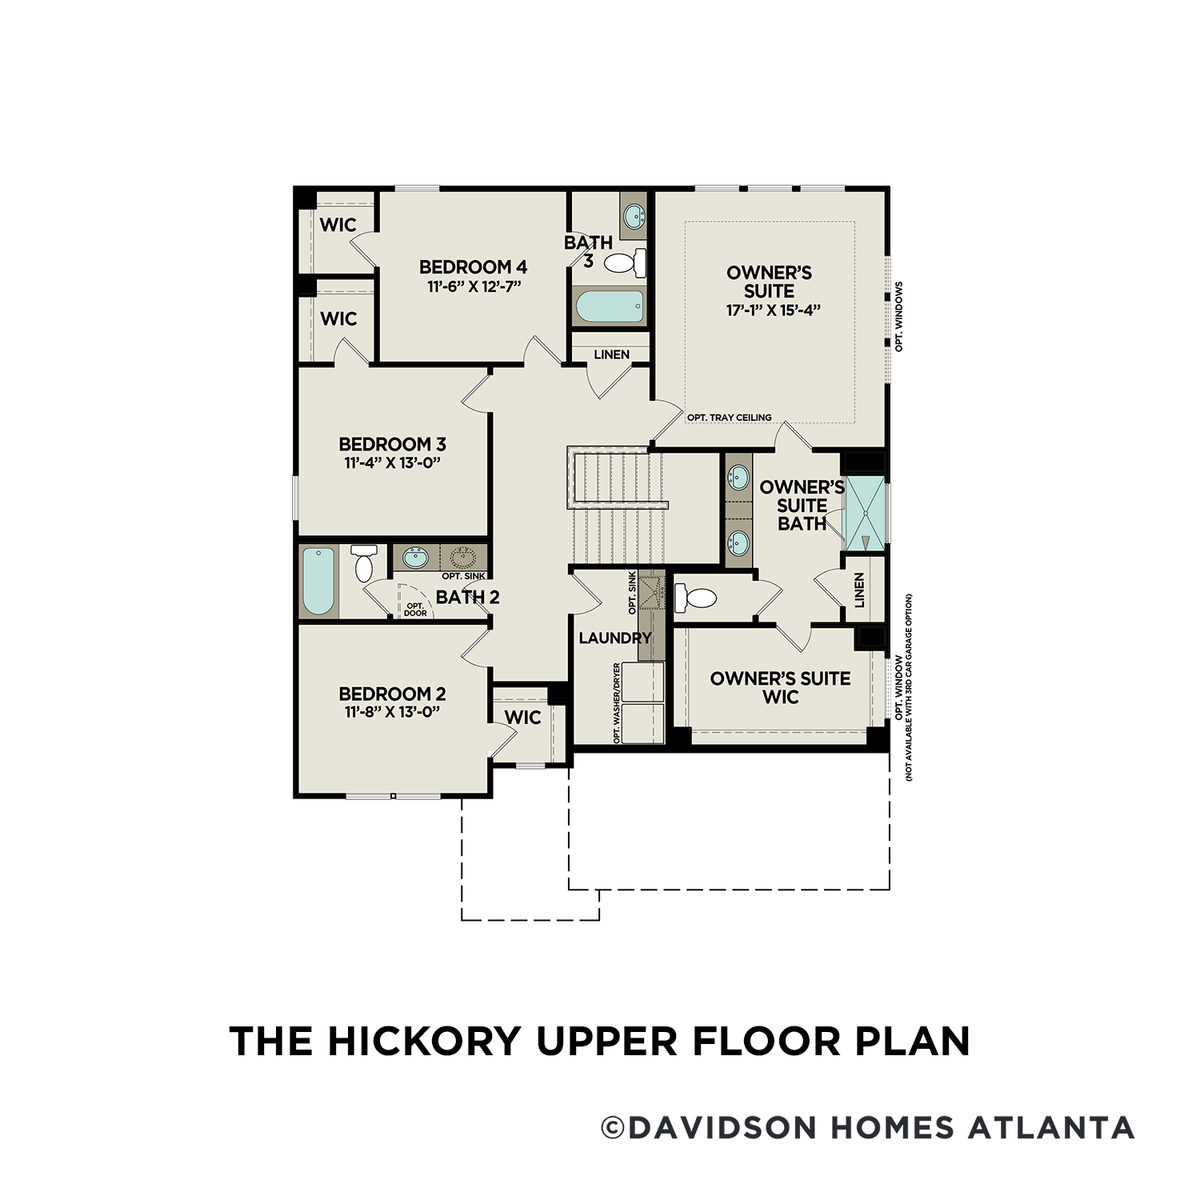 2 - The Hickory A floor plan layout for 433 Reinsman Court in Davidson Homes' Stagecoach Corner community.